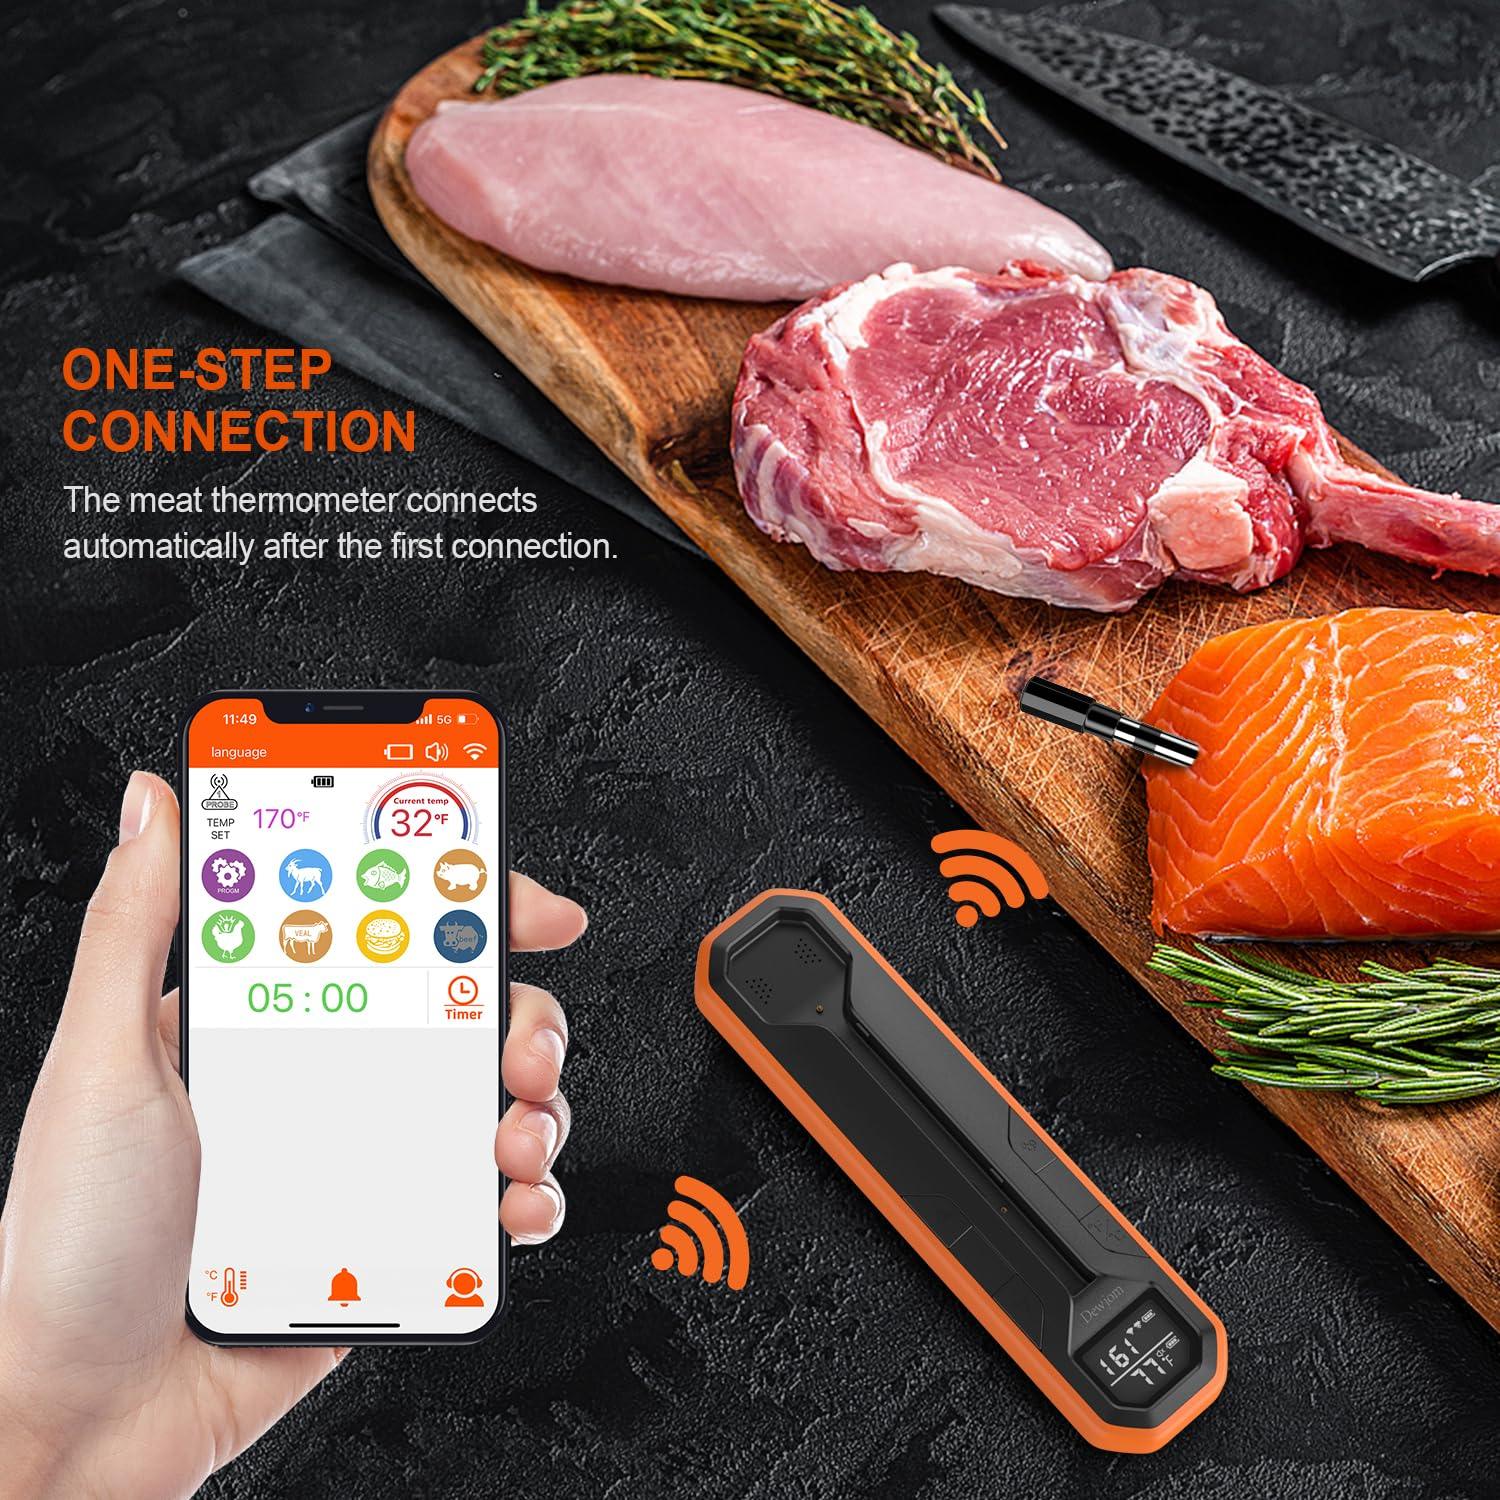 Dewjom Wireless Meat Thermometer – Digital Cooking Thermometer with Wireless Probe – 500Ft Remote Range Food Thermometer – with iOS & Android Read App -Preprogrammed Temperatures for BBQ, Oven, Grill - CookCave